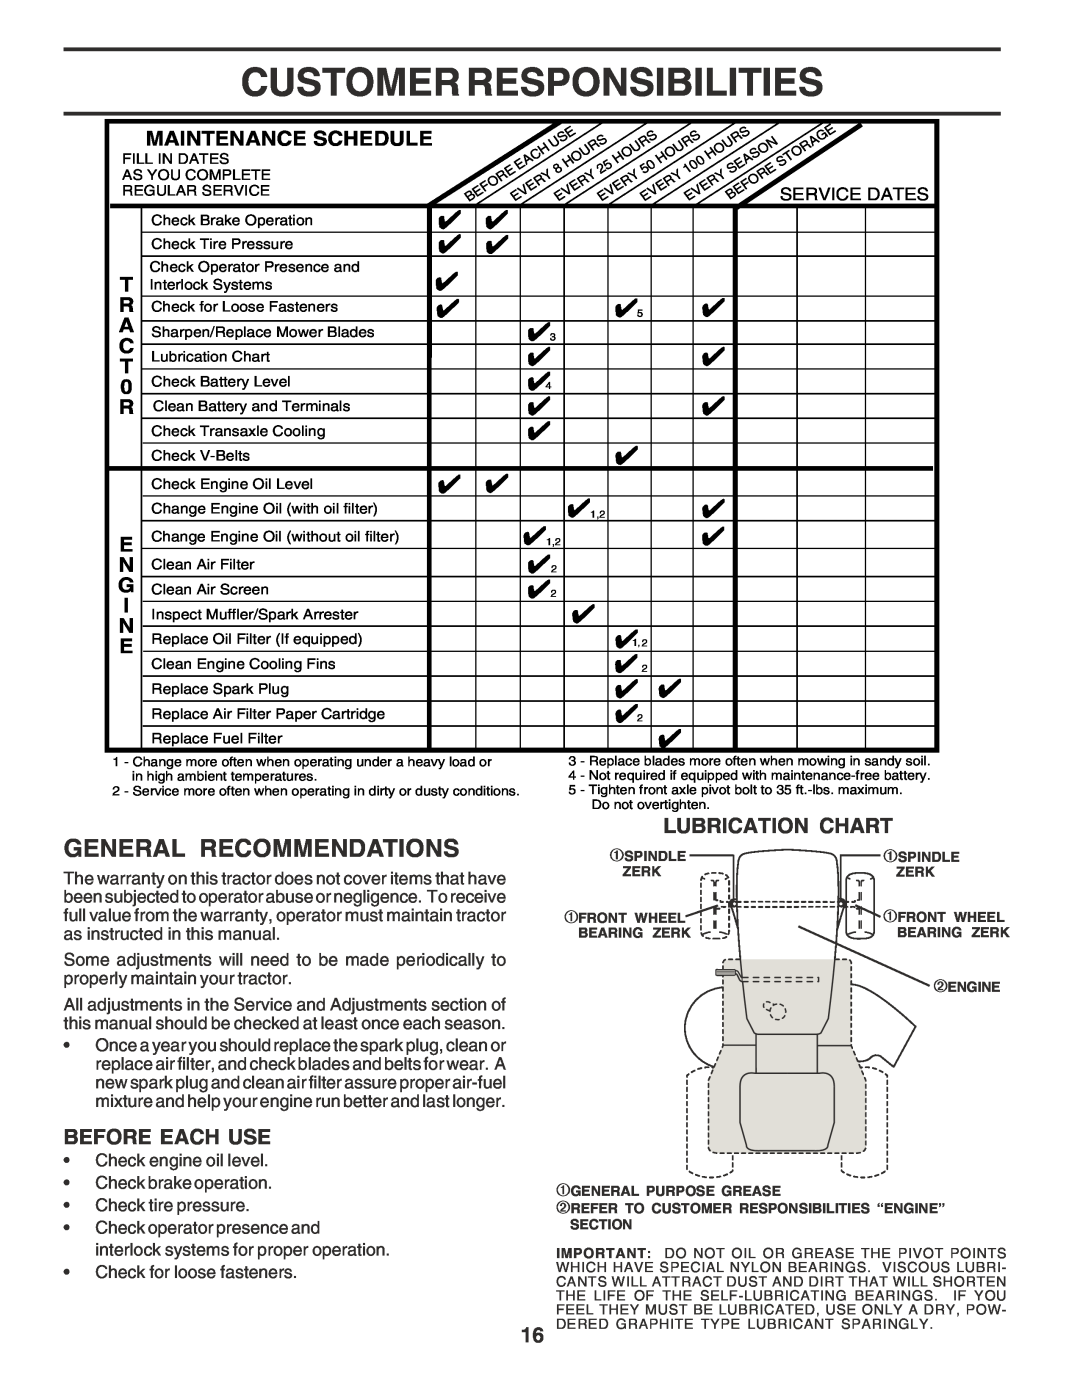 Poulan PR185H42STF owner manual Customer Responsibilities, General Recommendations, Lubrication Chart, Before Each Use 